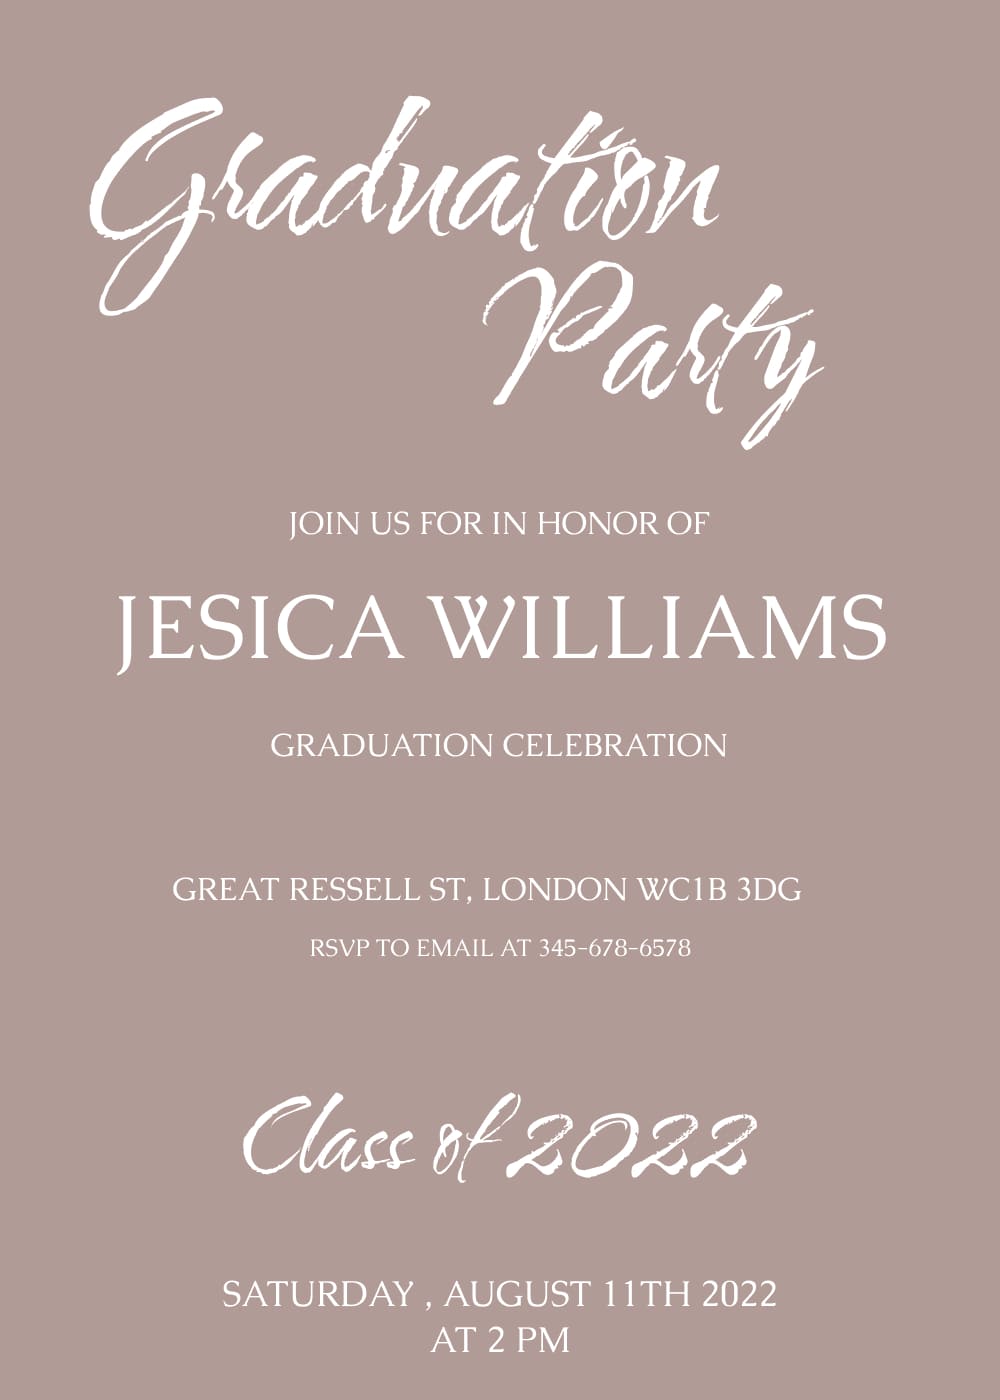 Pastel invitation for a graduation party.